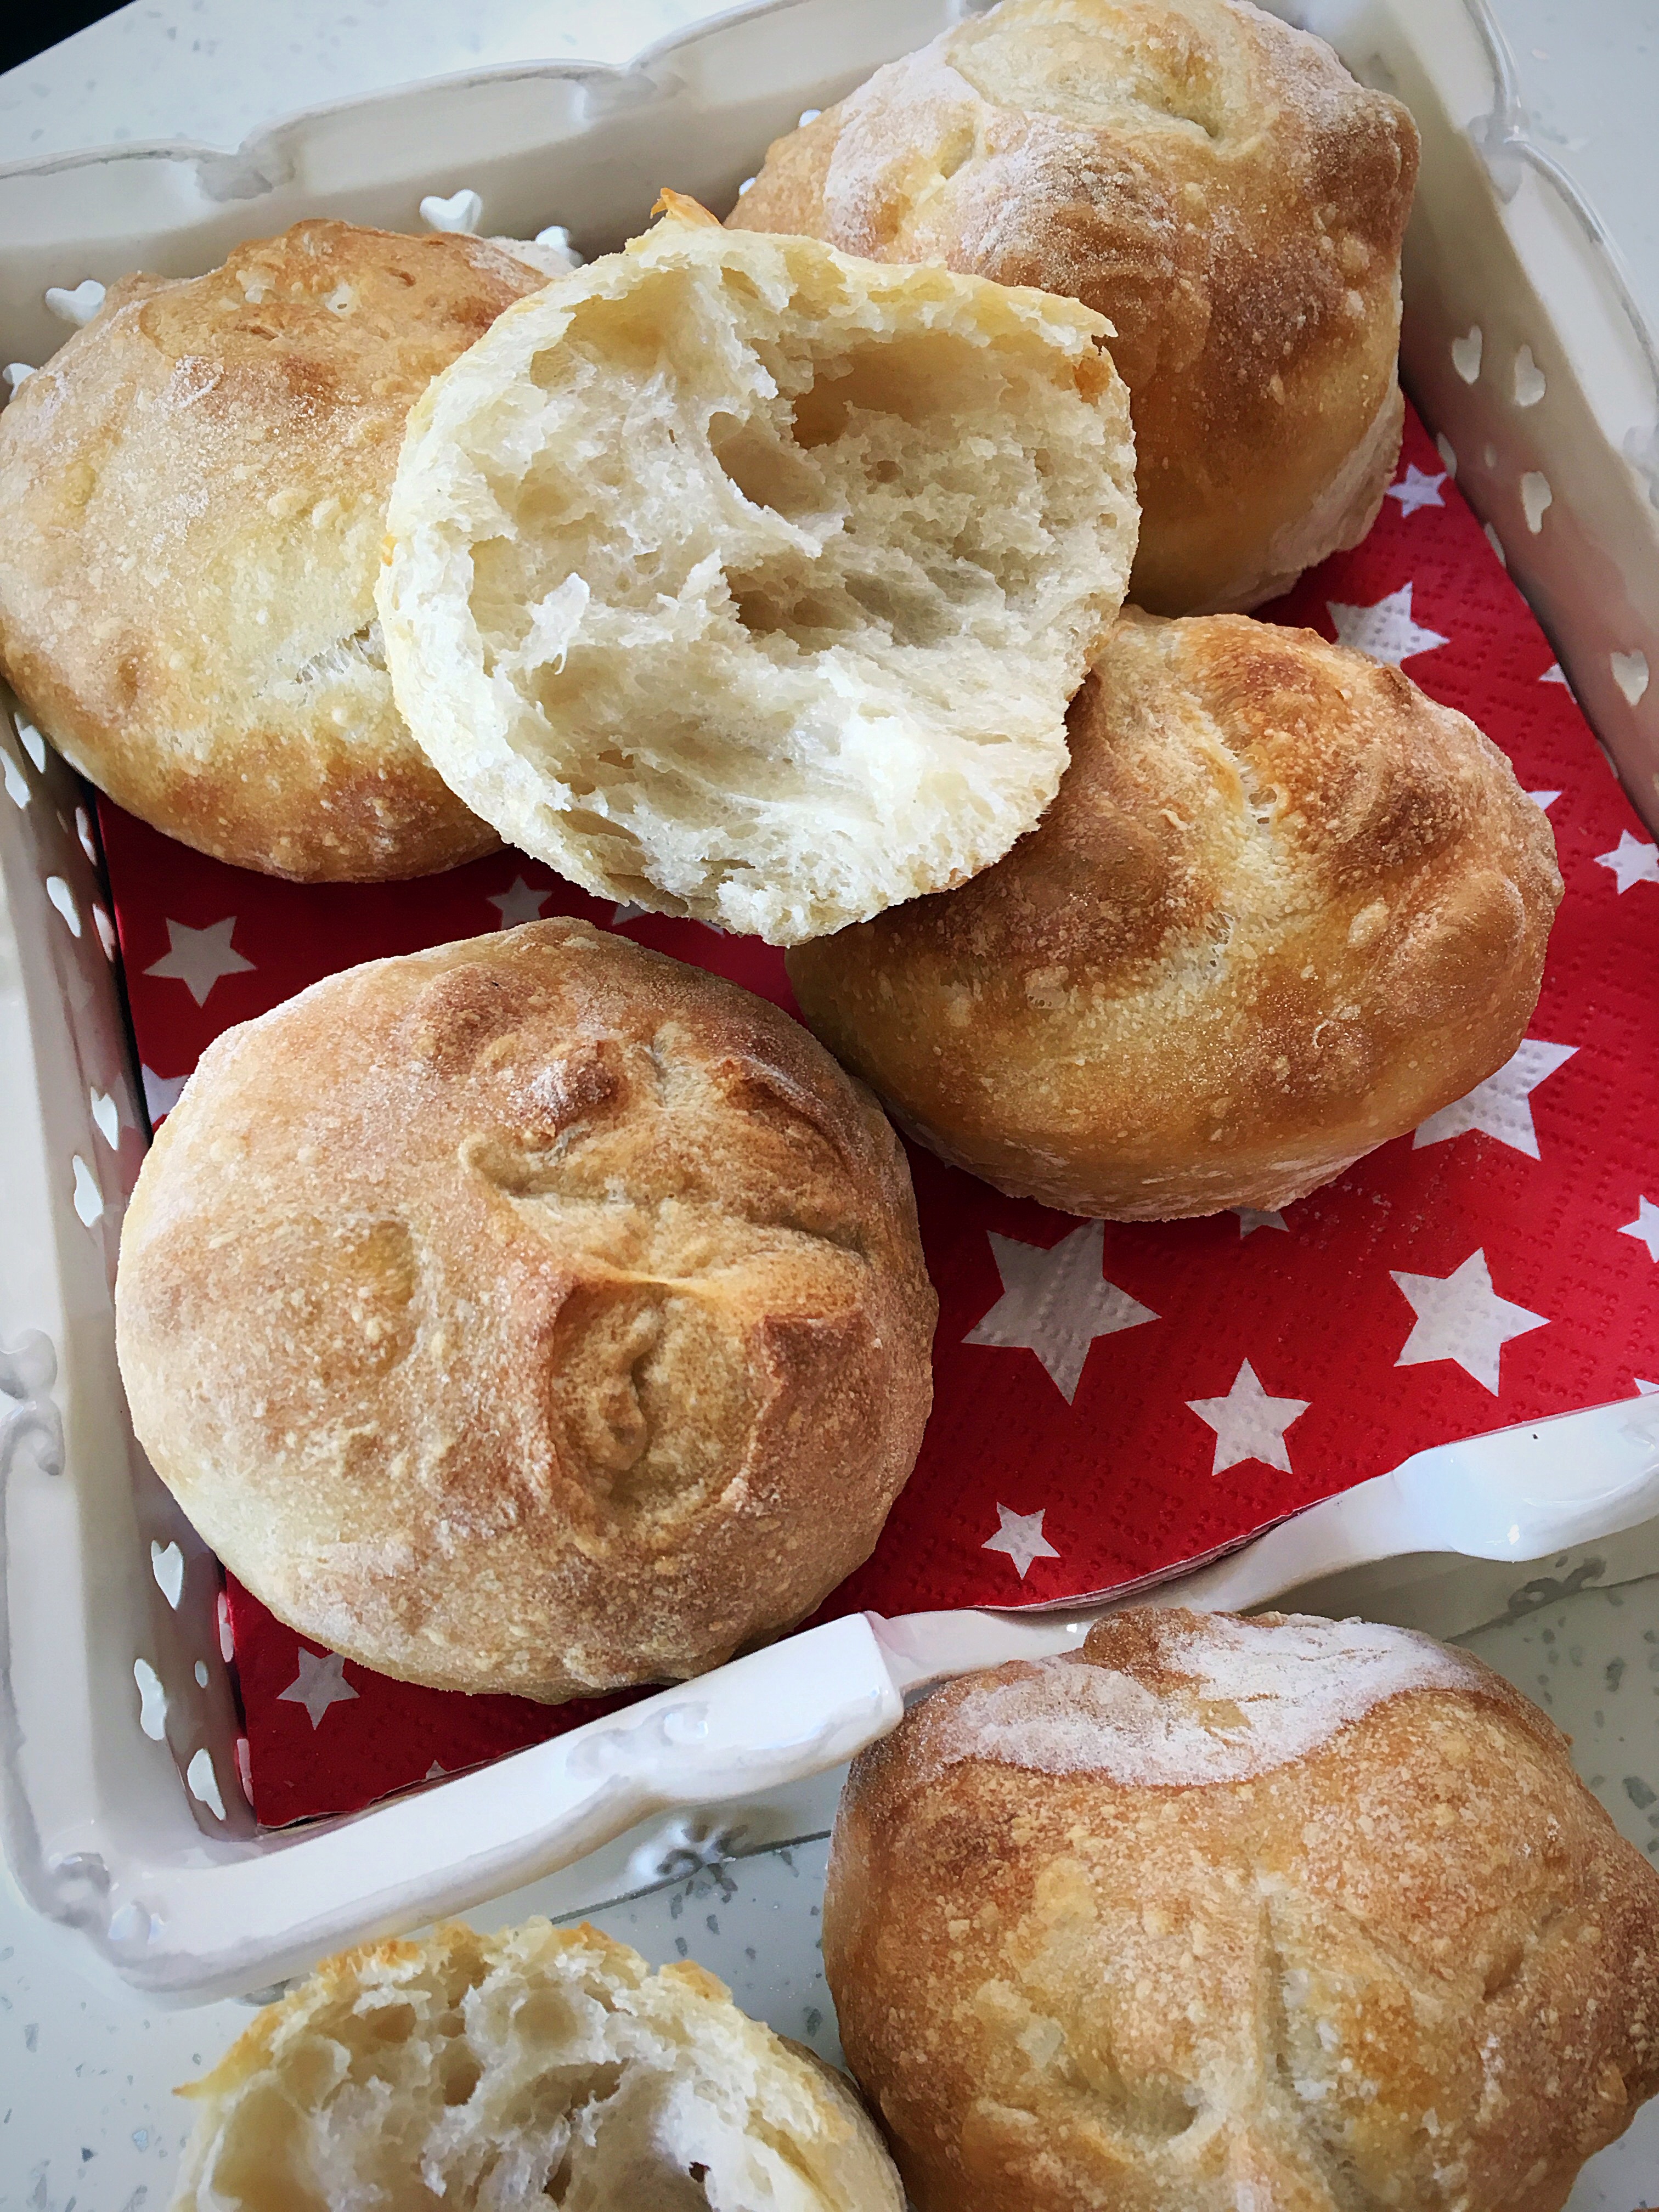 A basket of biscuits on top of a red and white star paper.